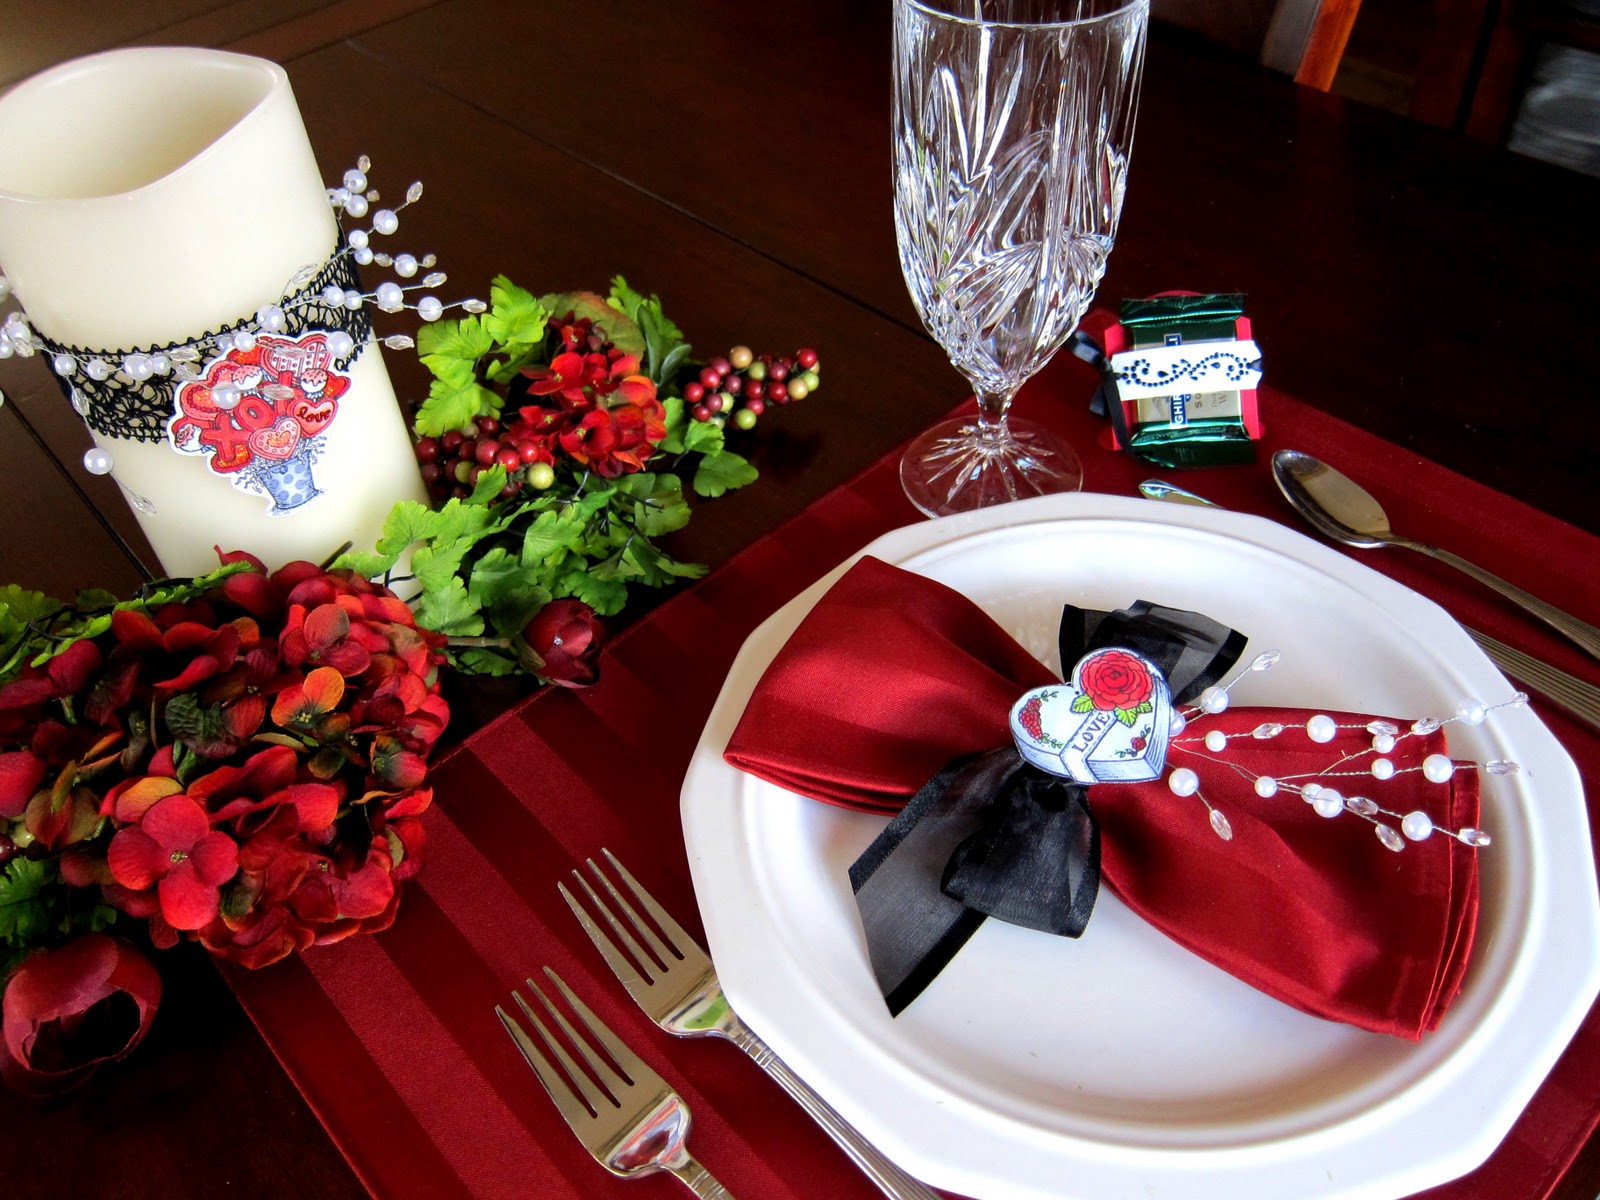 elegant-valentine-table-setting-with-ribboned-red-folding-napkin-and-red-placemat-valentine-day-table-decor-ideas